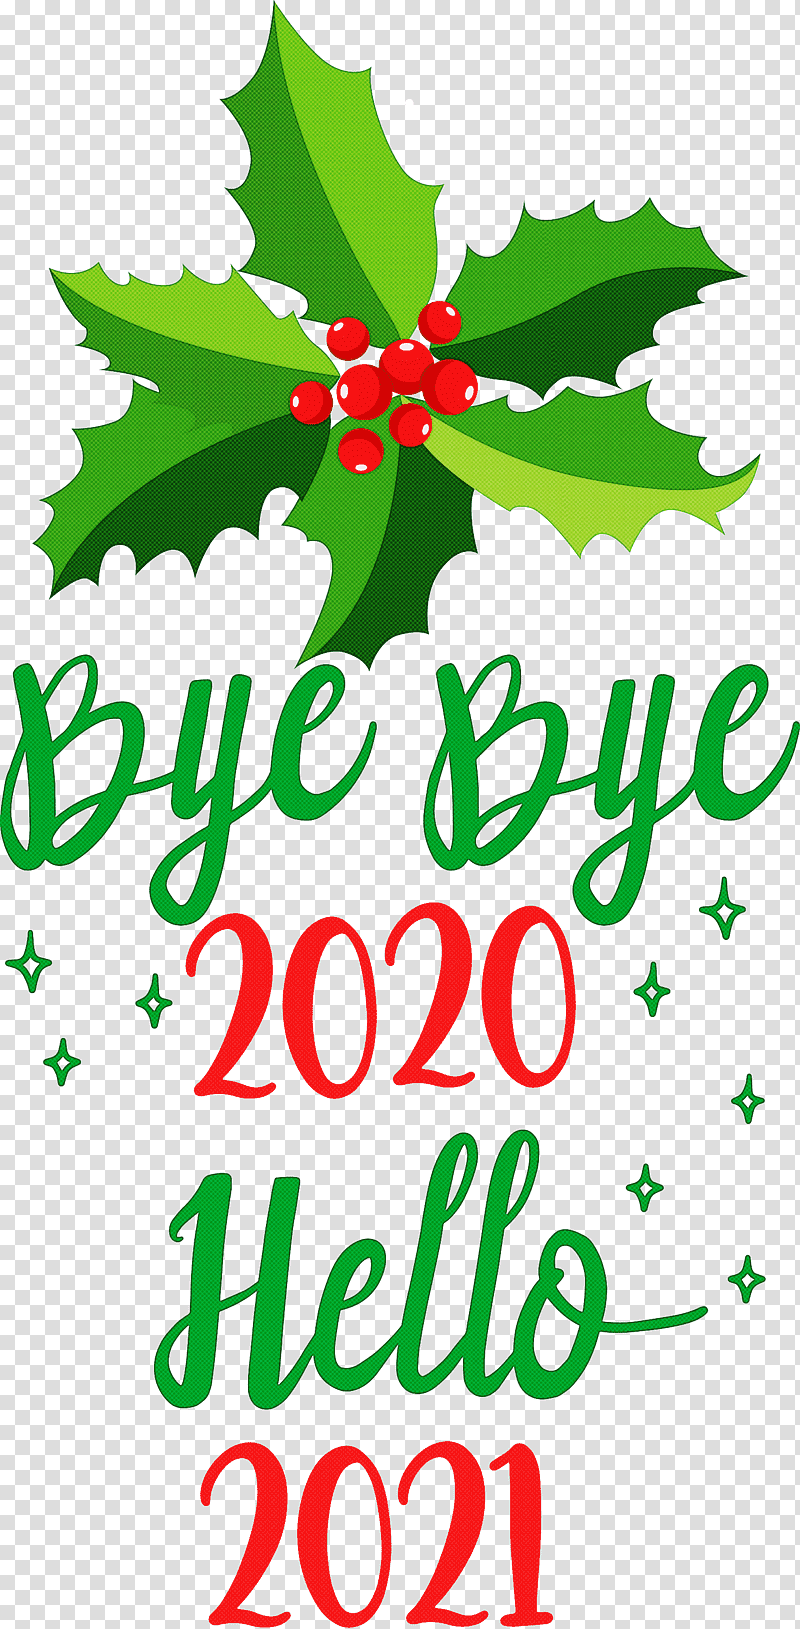 Hello 2021 Year Bye bye 2020 Year, Christmas Day, Leaf Painting, Drawing, Abstract Art, transparent background PNG clipart